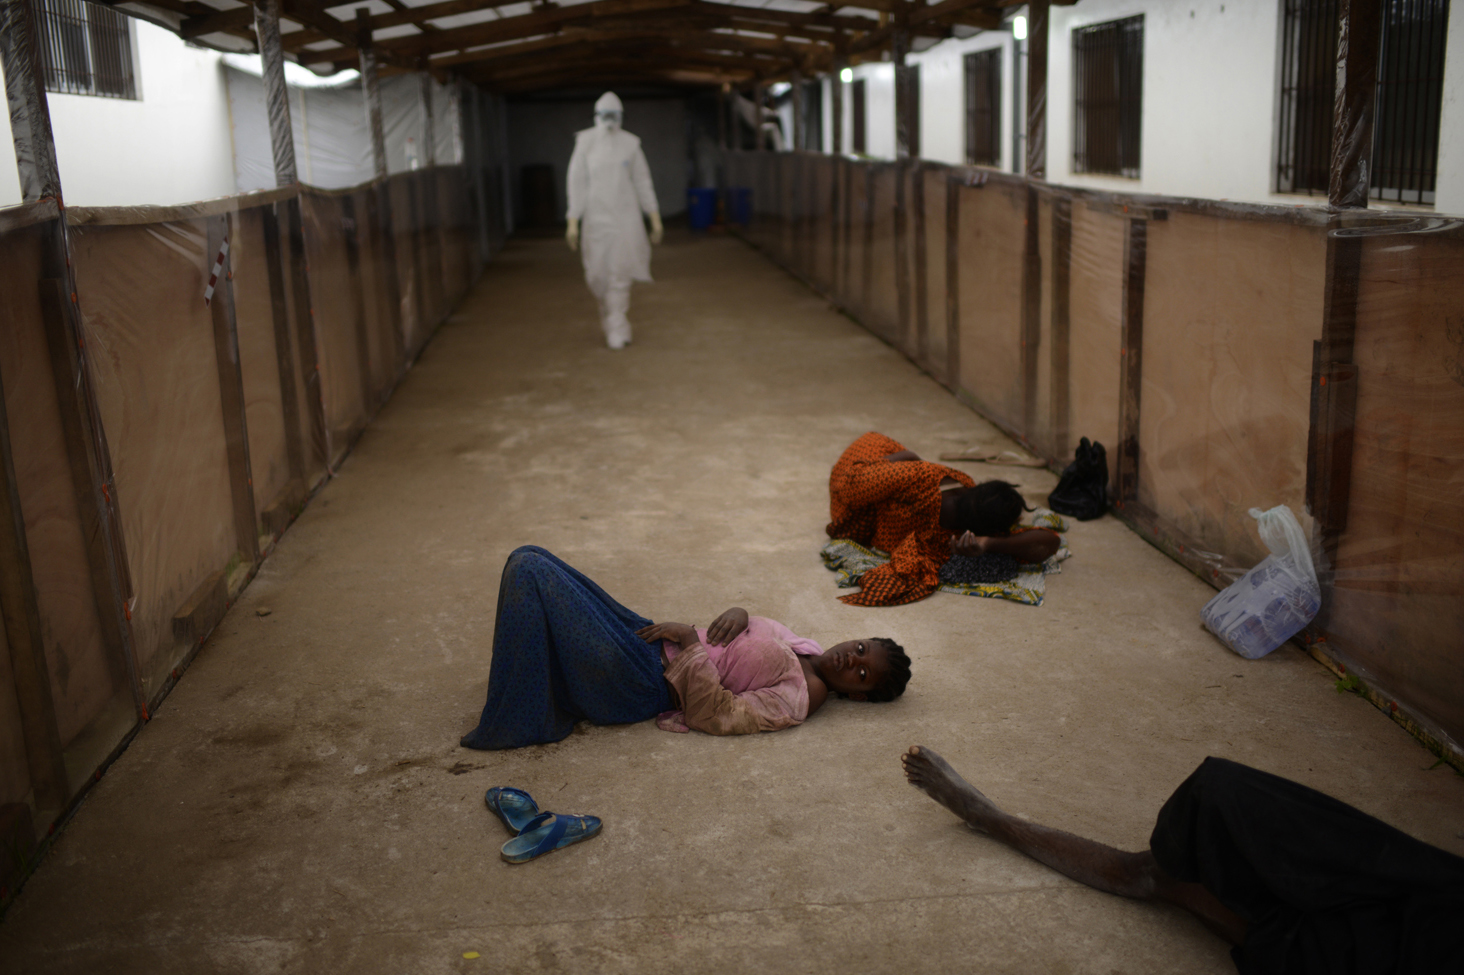 Critically ill patients wait for beds to be prepared for them at Island Clinic, Monrovia, Liberia, Sept. 24, 2014.